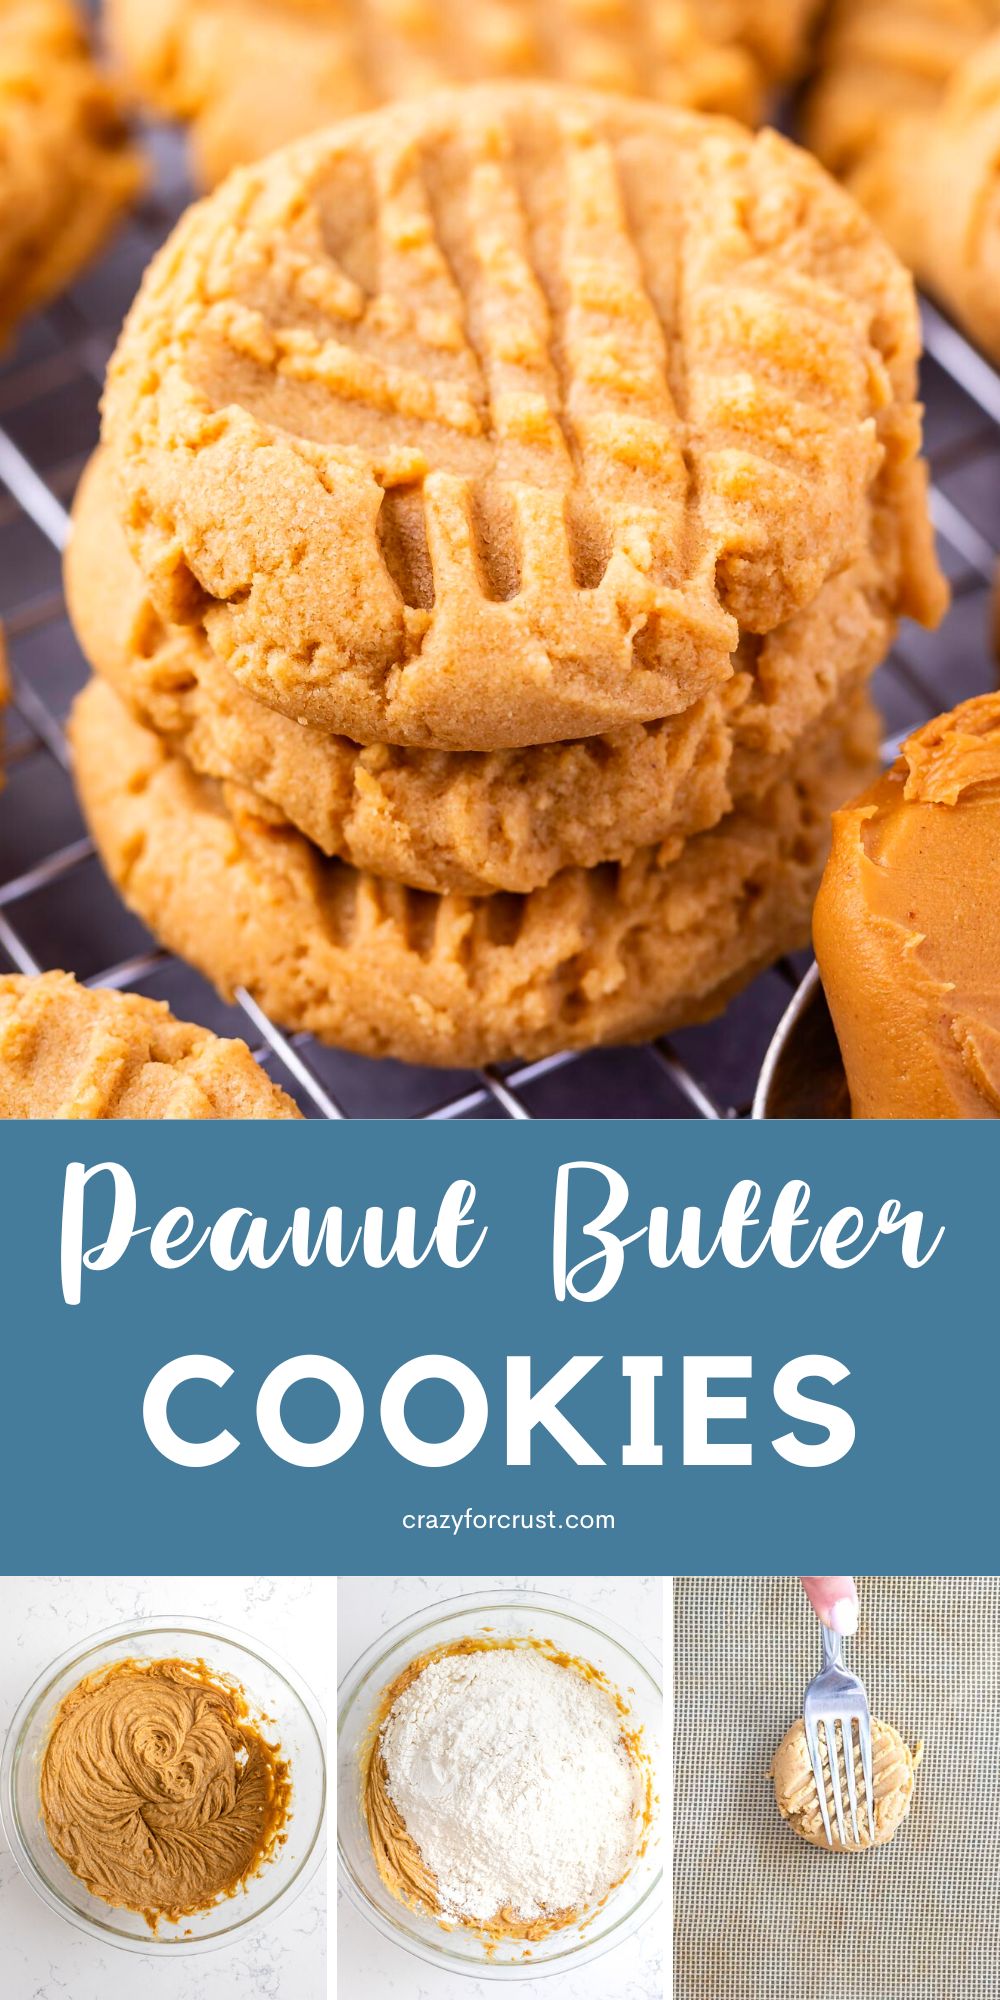 stack of 3 peanut butter cookies with 3 photos showing how to make them